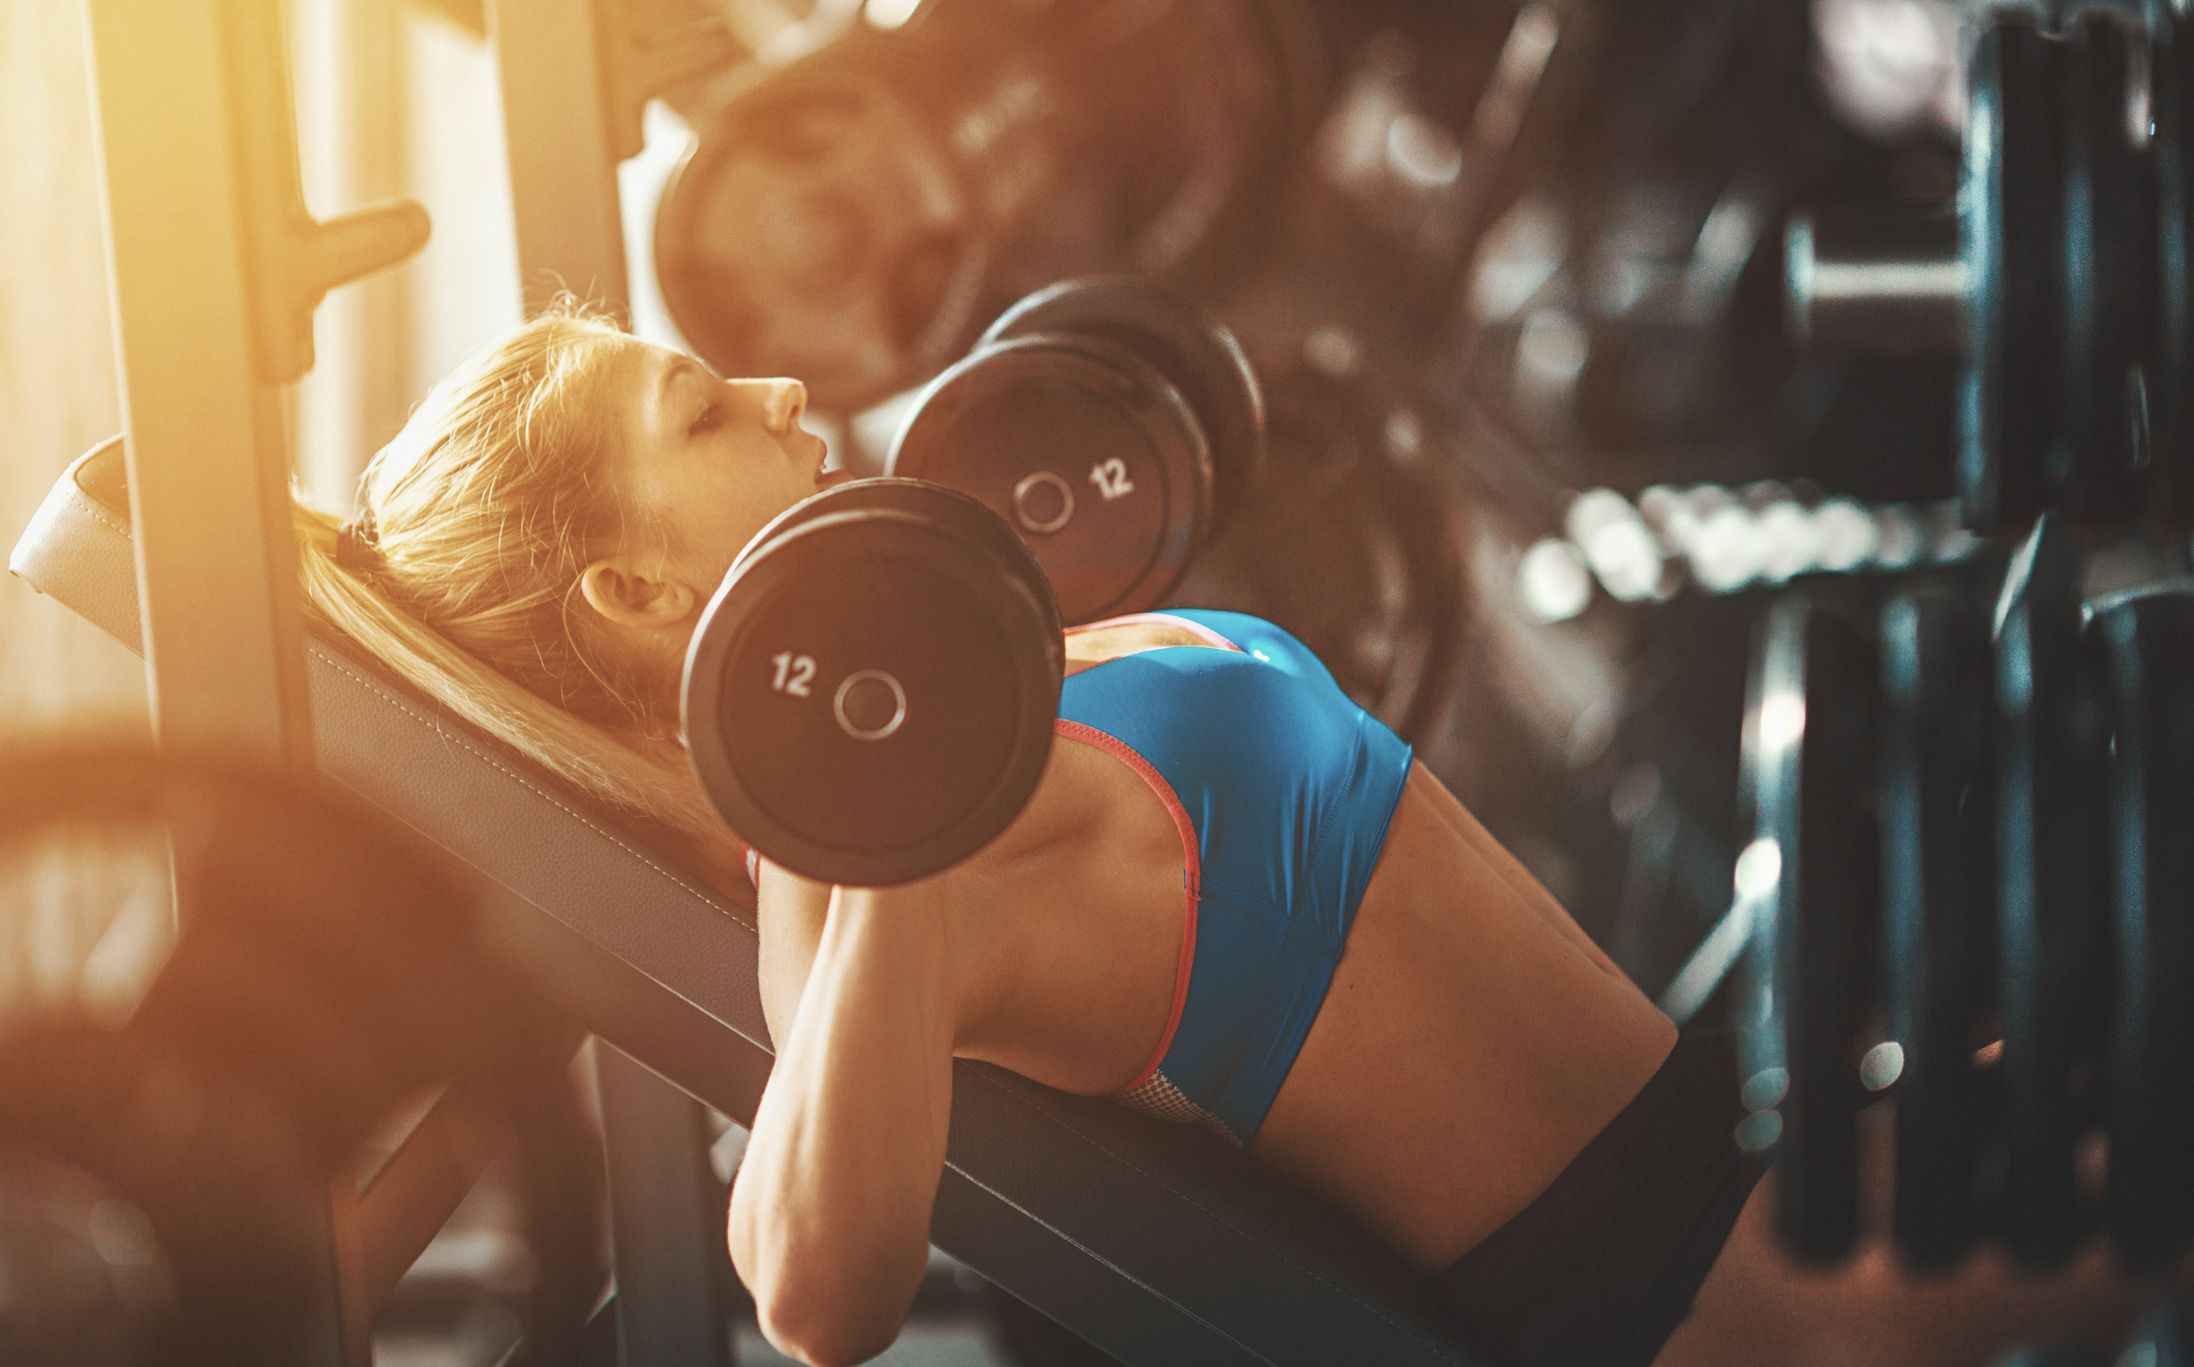 5 Best Chest Exercises for women l at Gym, Beginners l Planfit Article